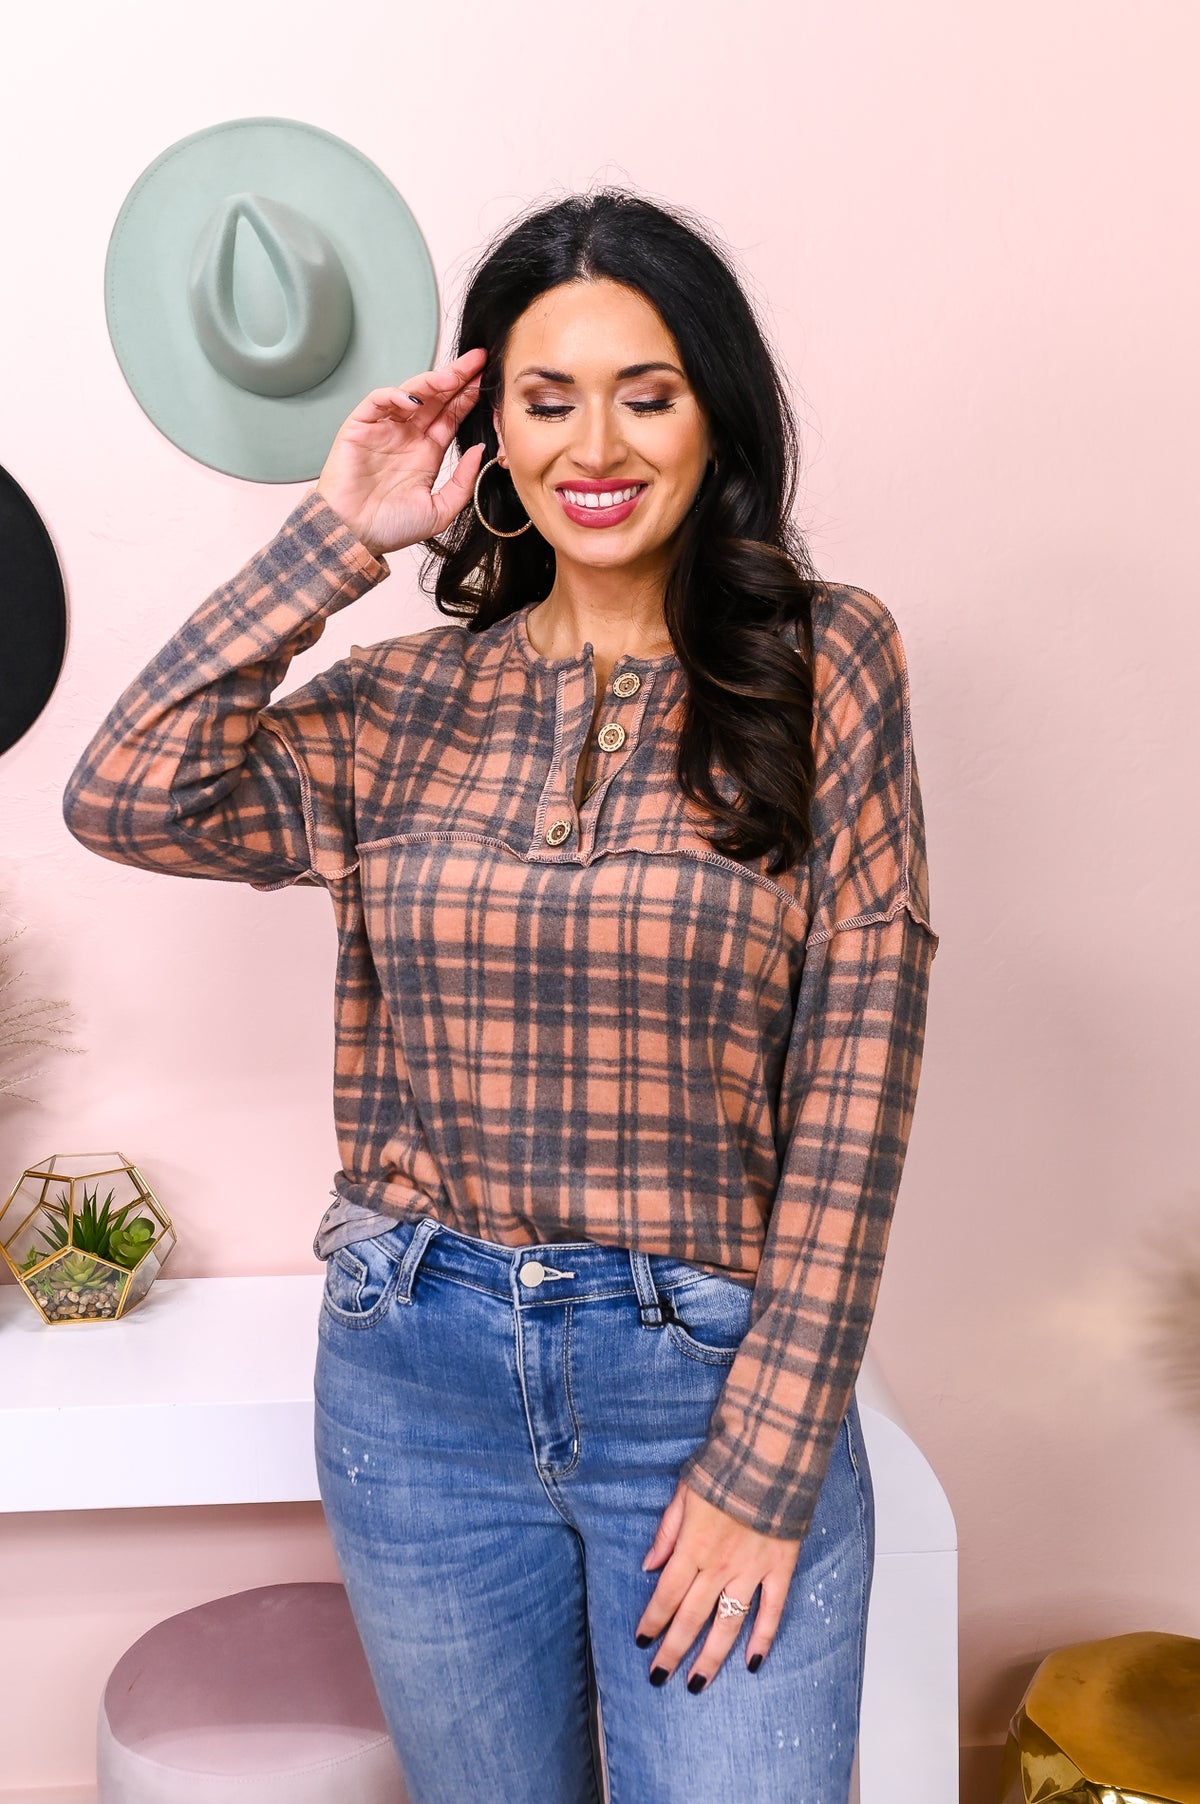 Perception Is Everything Dusty Rust/Dusty Charcoal Gray Plaid Top - T5968DRU